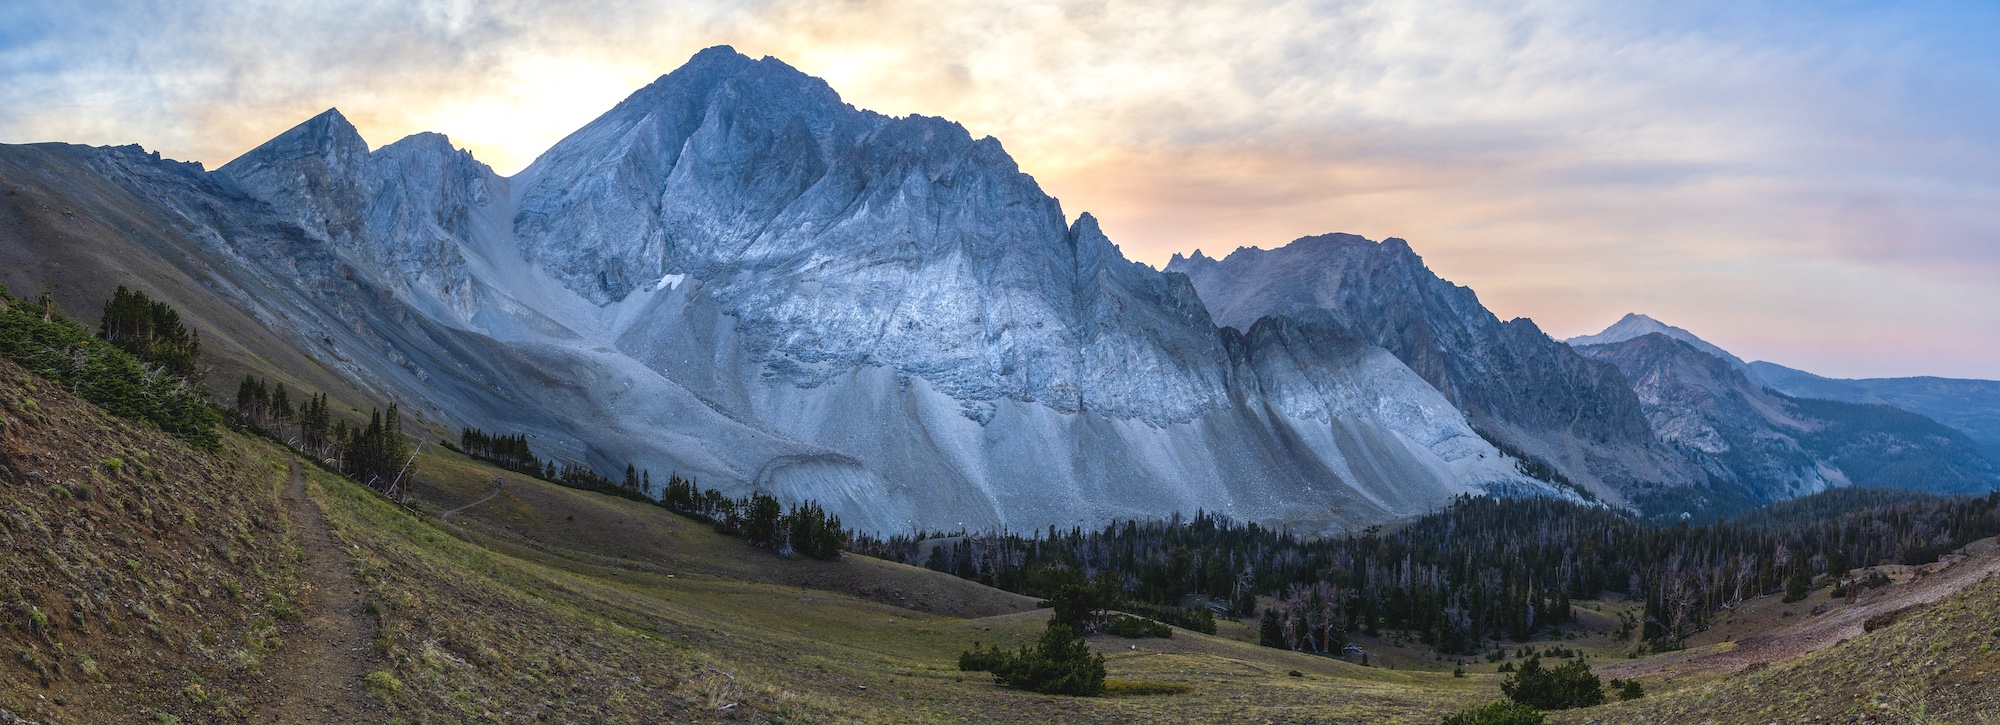 The Castle Divide in Idaho's White Clouds Mountains